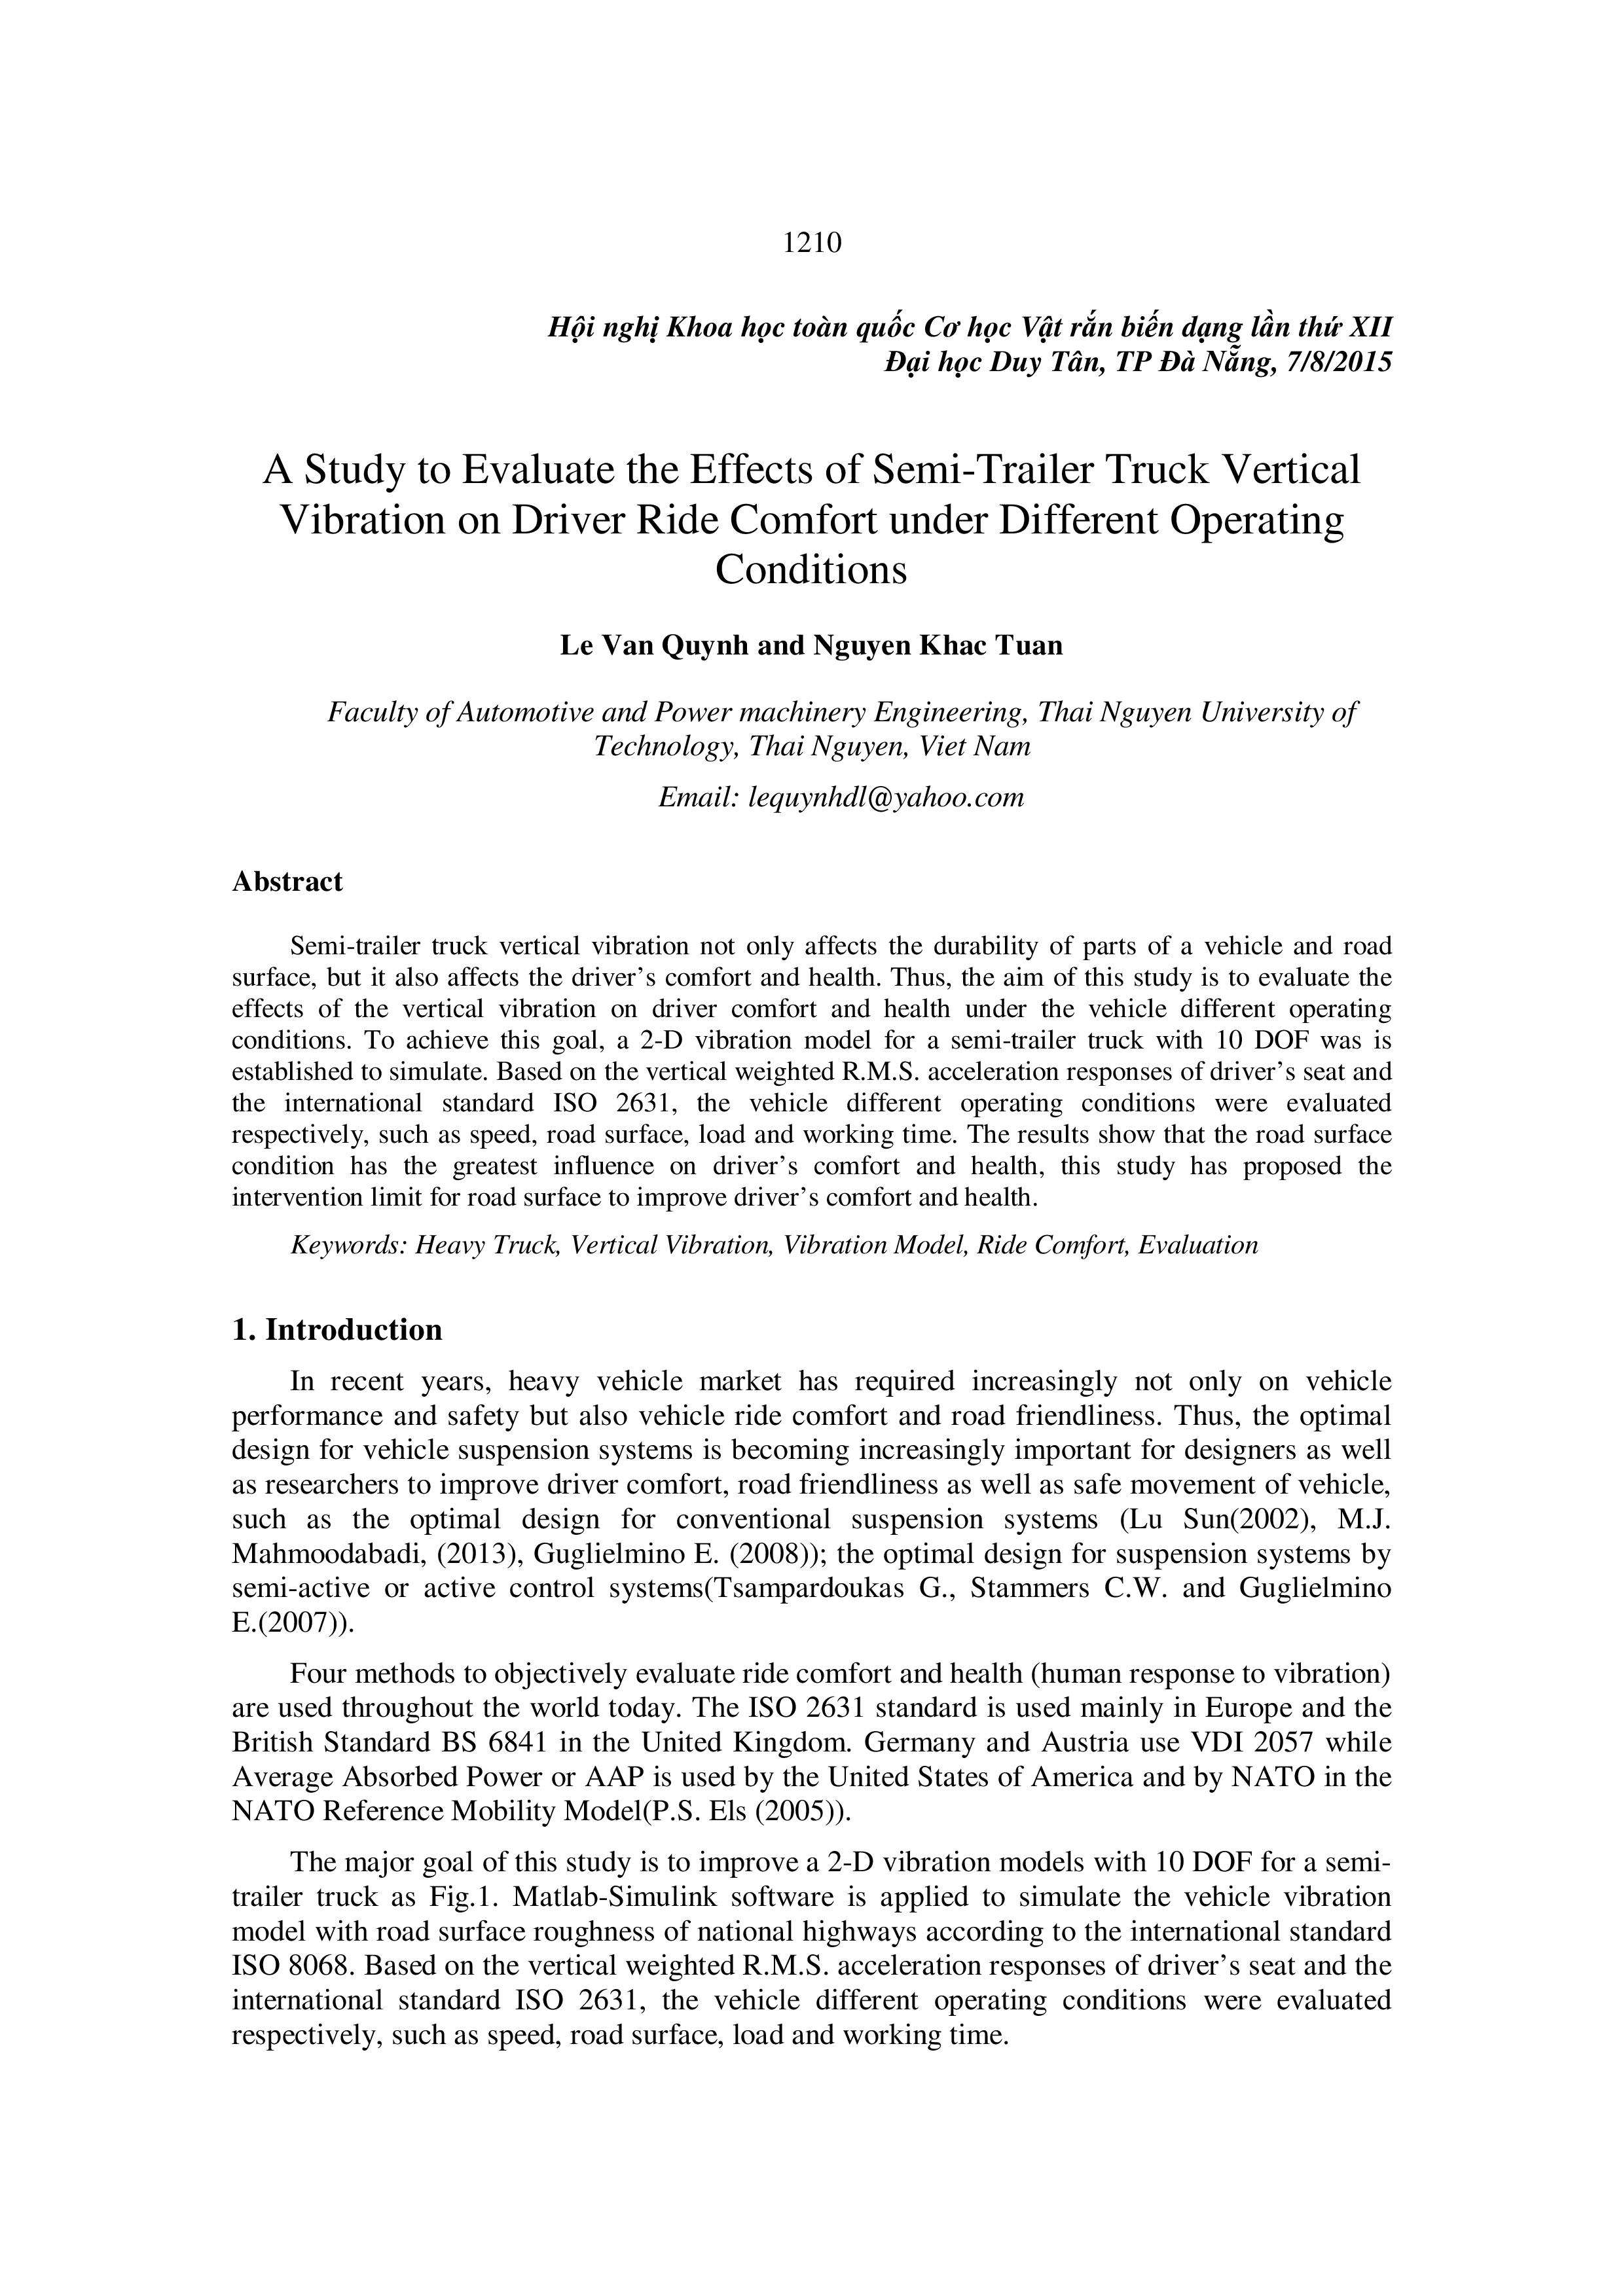 A study to avaluate the effects of semi - trailer truck vertical vibration on driver ride comfort under different operating conditions